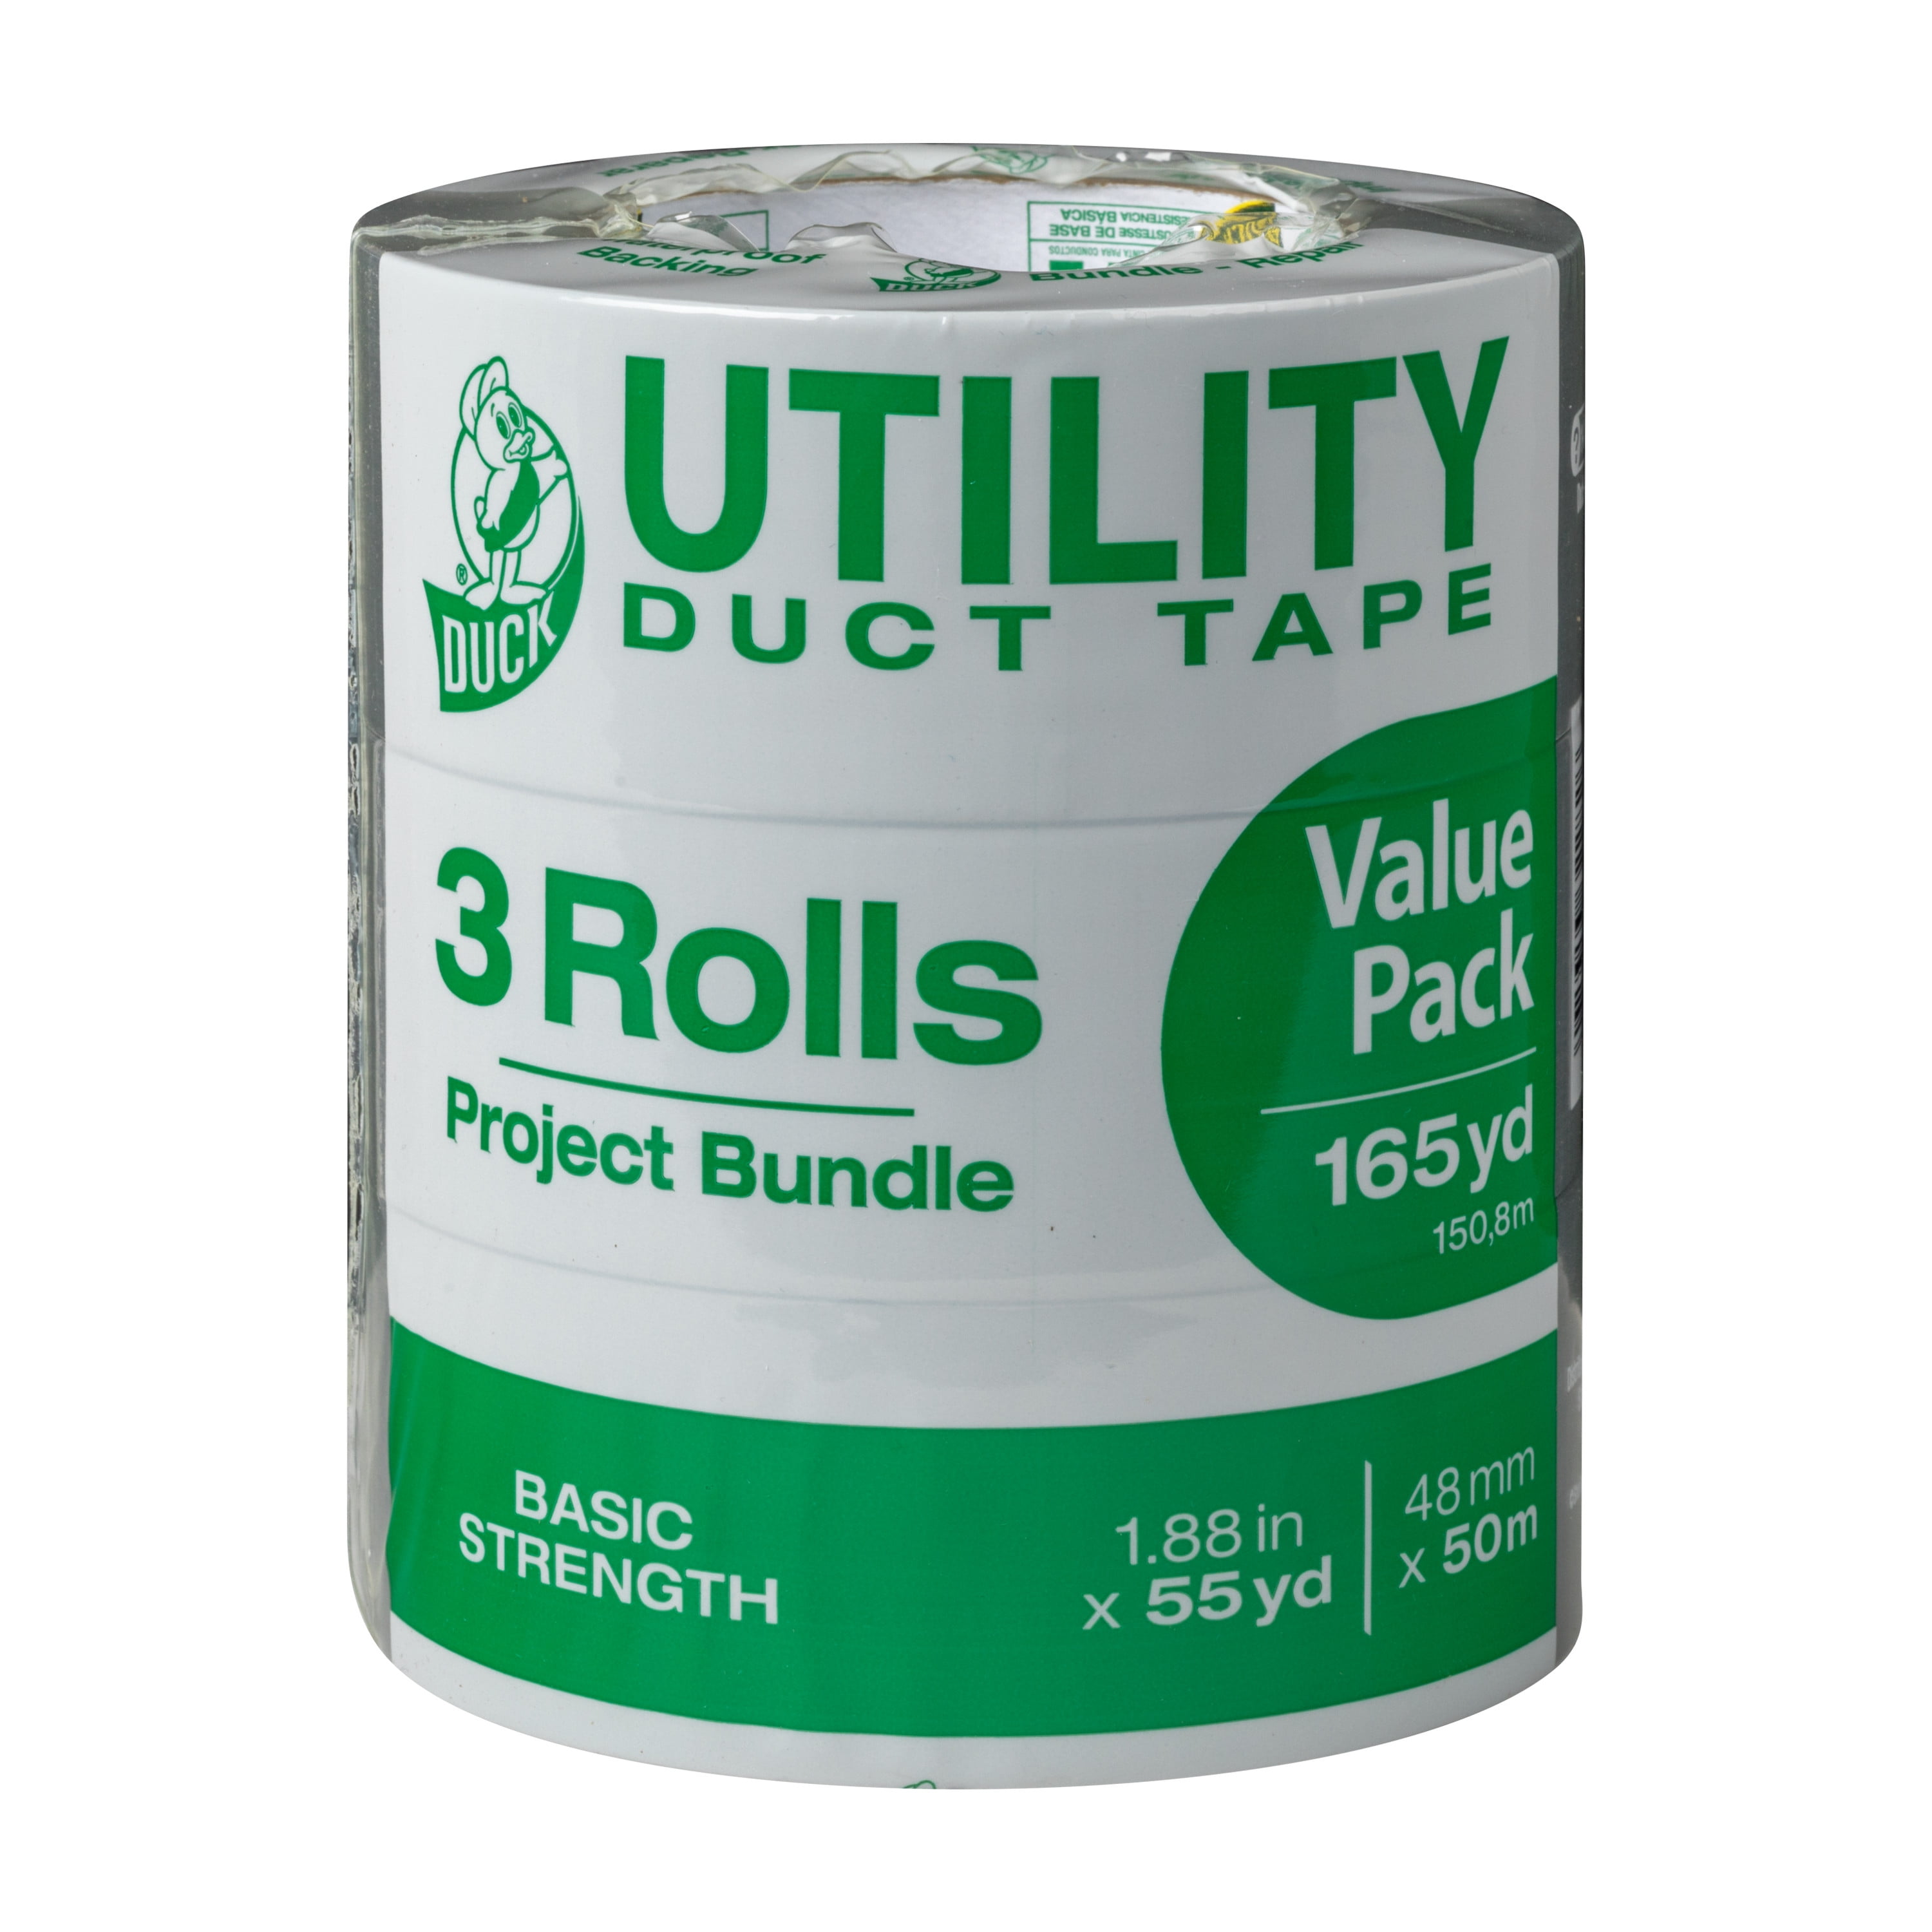 Duck Duct Tape, Utility 1118393